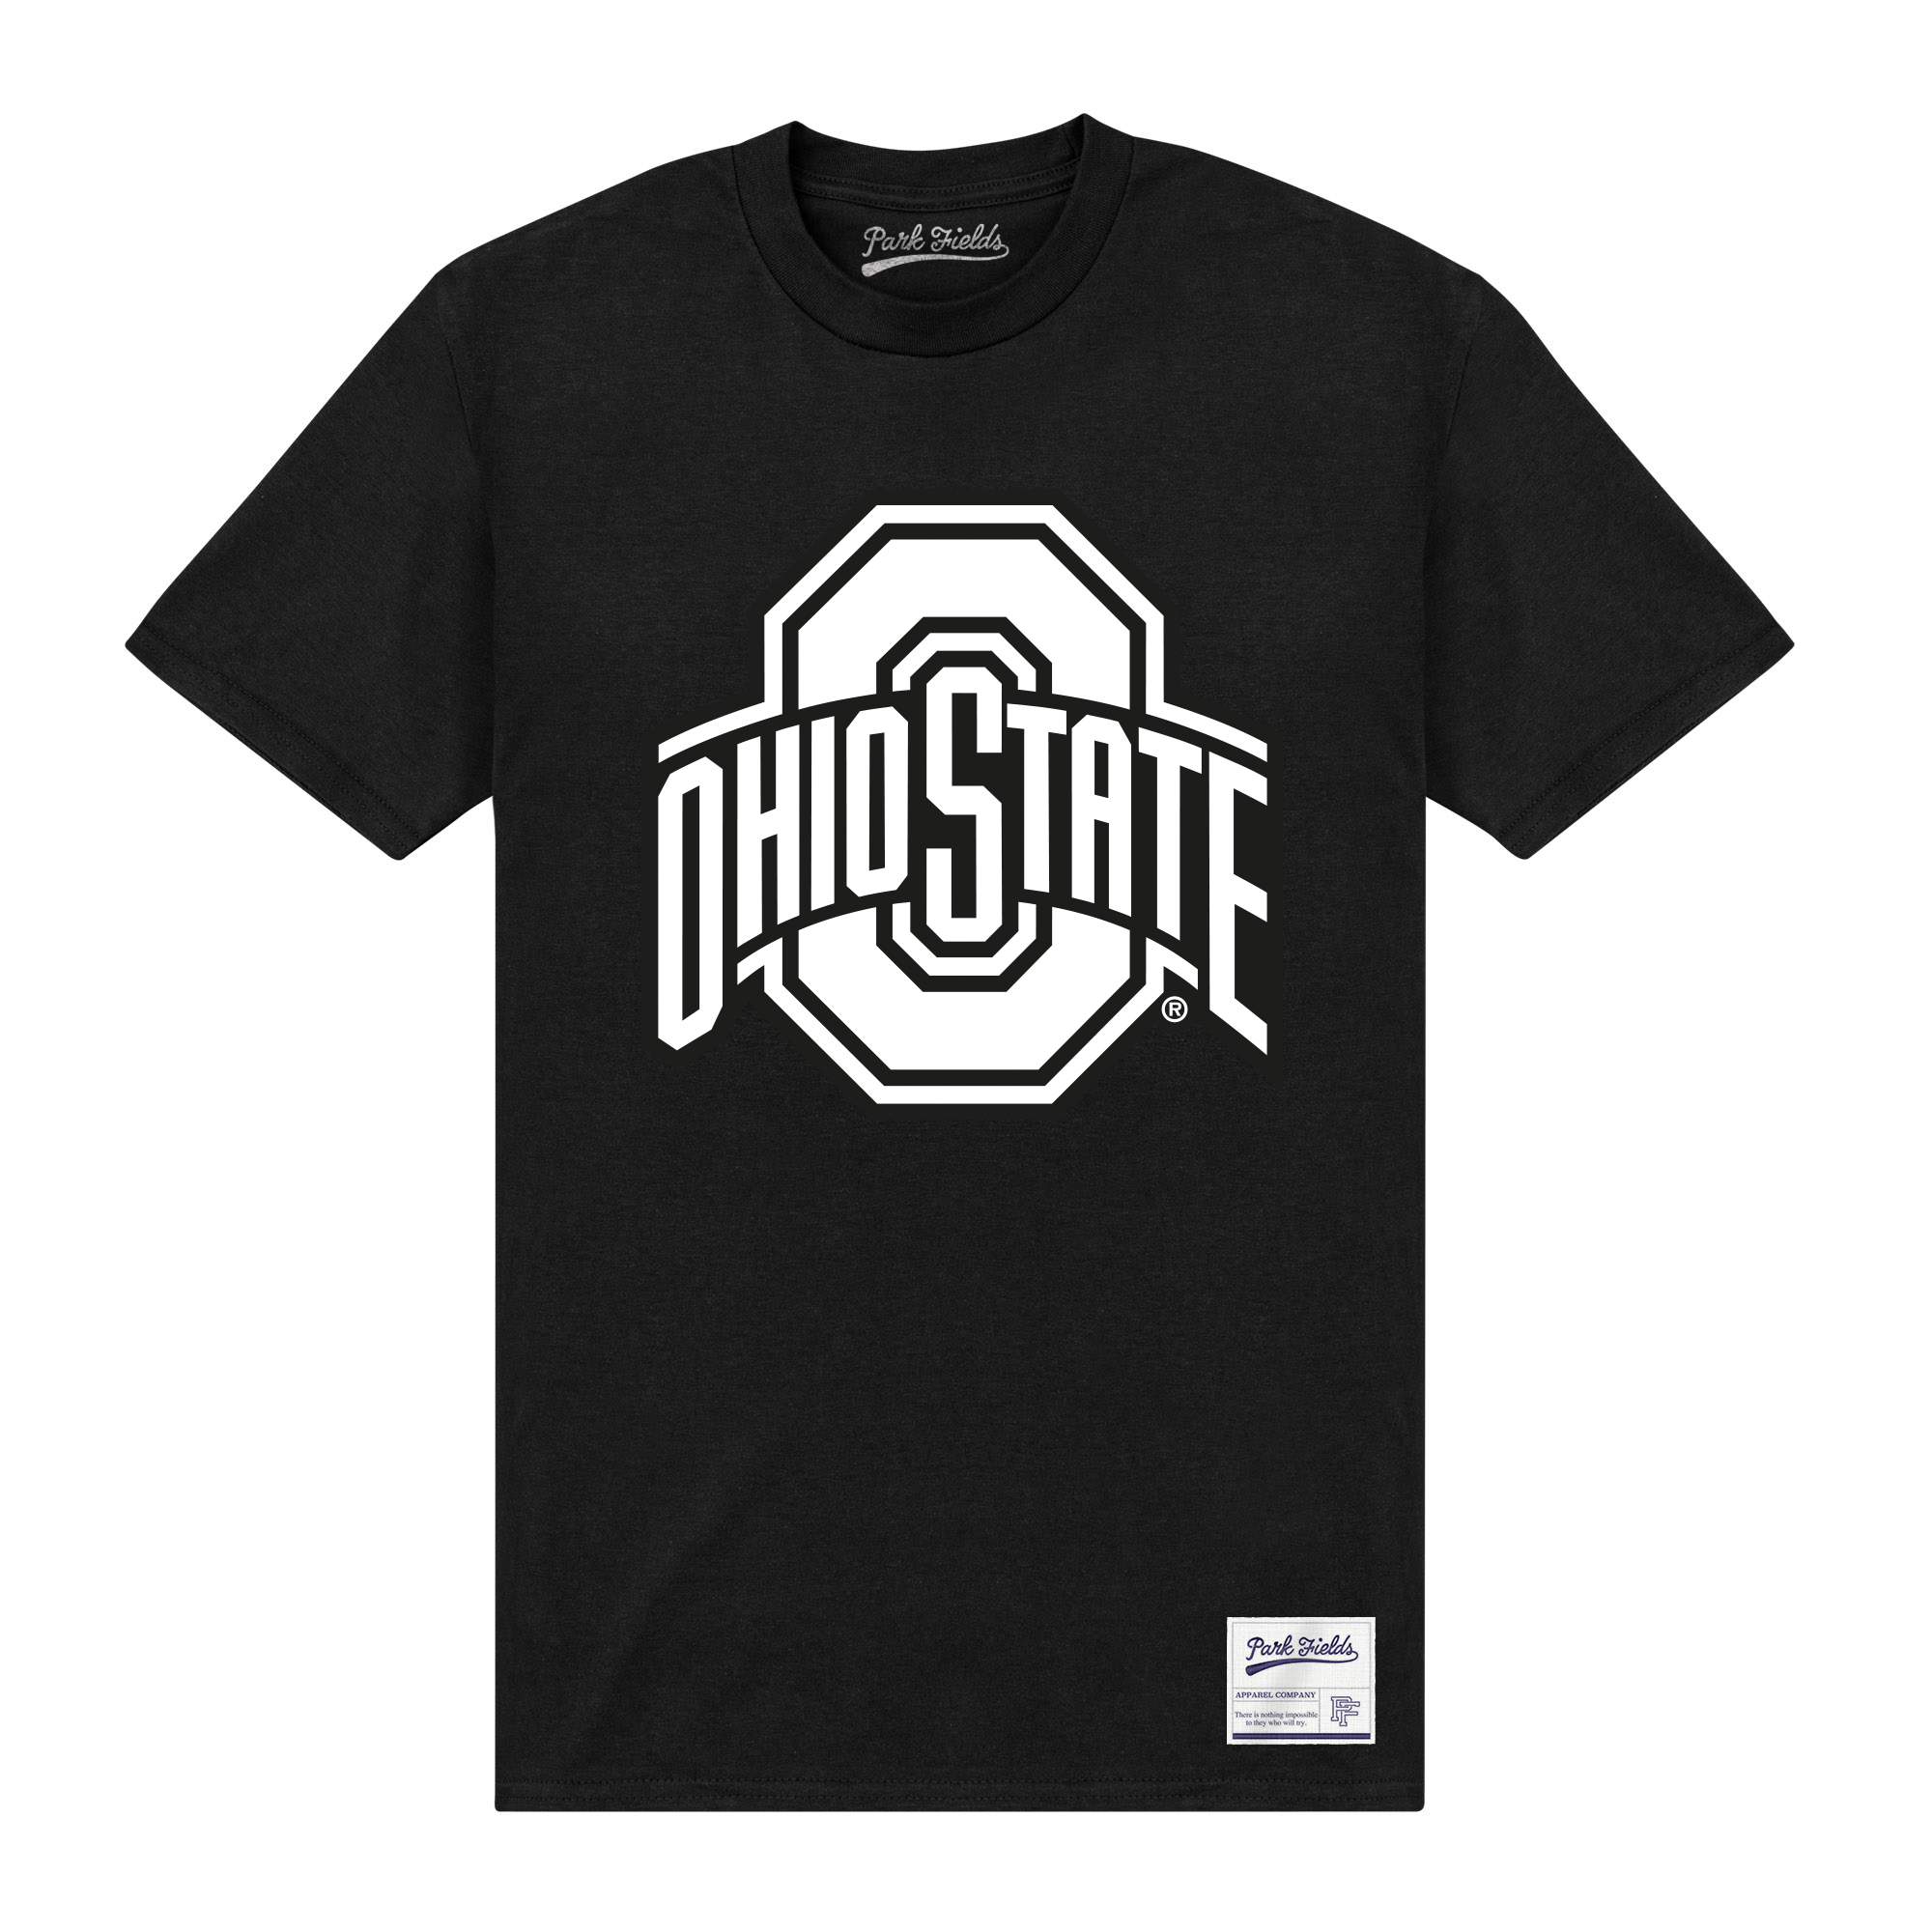 Official Ohio State University T-Shirt Black Short Sleeve Crew Neck Tee Top